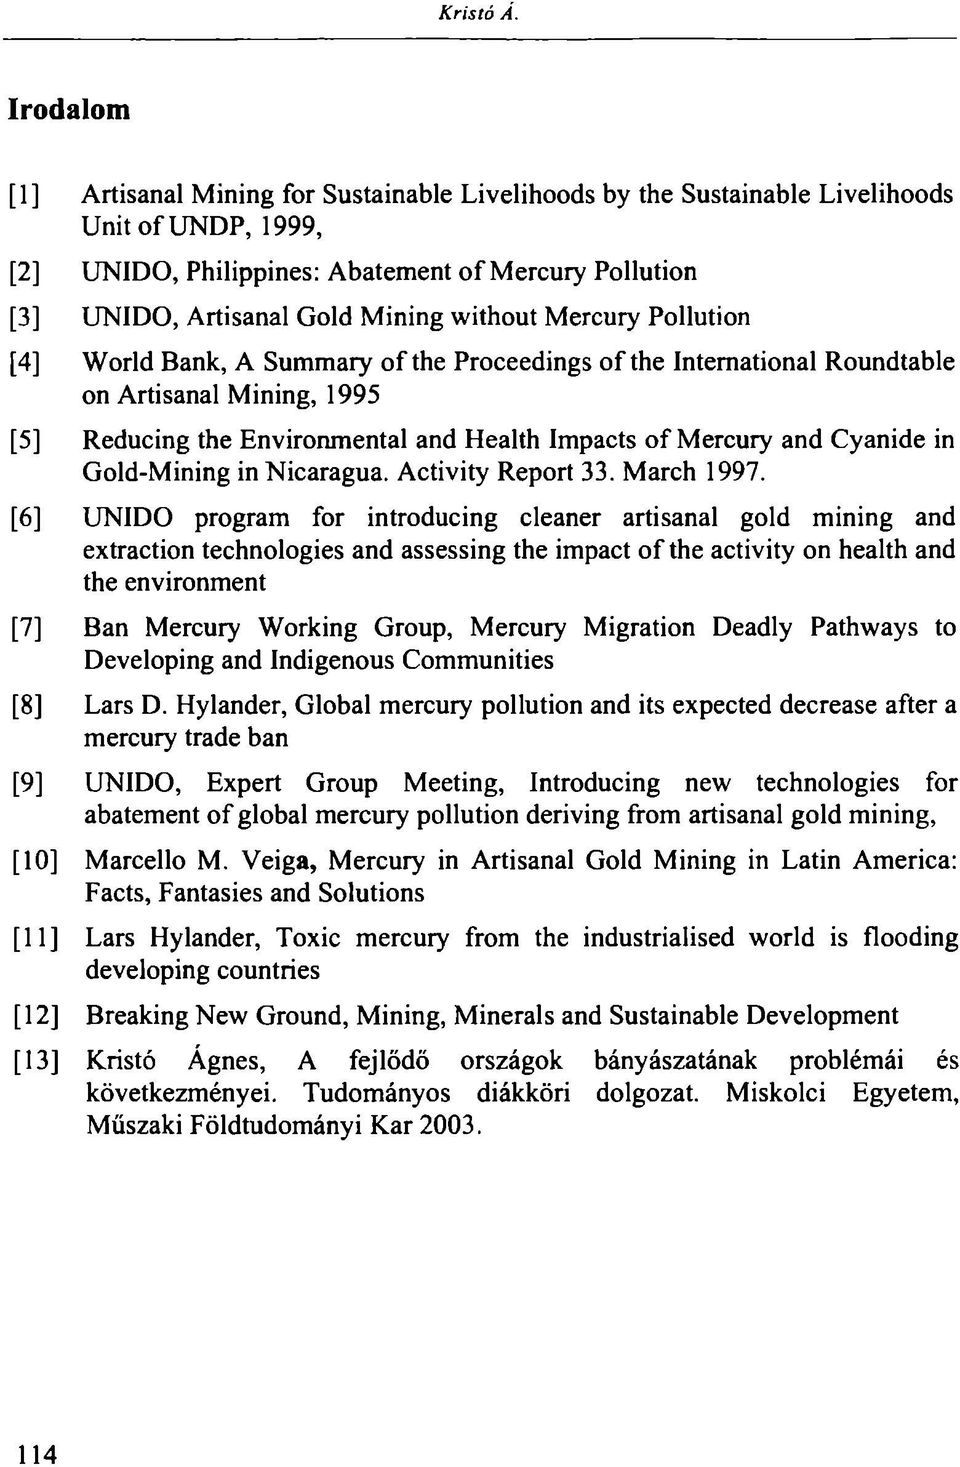 without Mercury Pollution [4] World Bank, A Summary of the Proceedings of the International Roundtable on Artisanal Mining, 1995 [5] Reducing the Environmental and Health Impacts of Mercury and